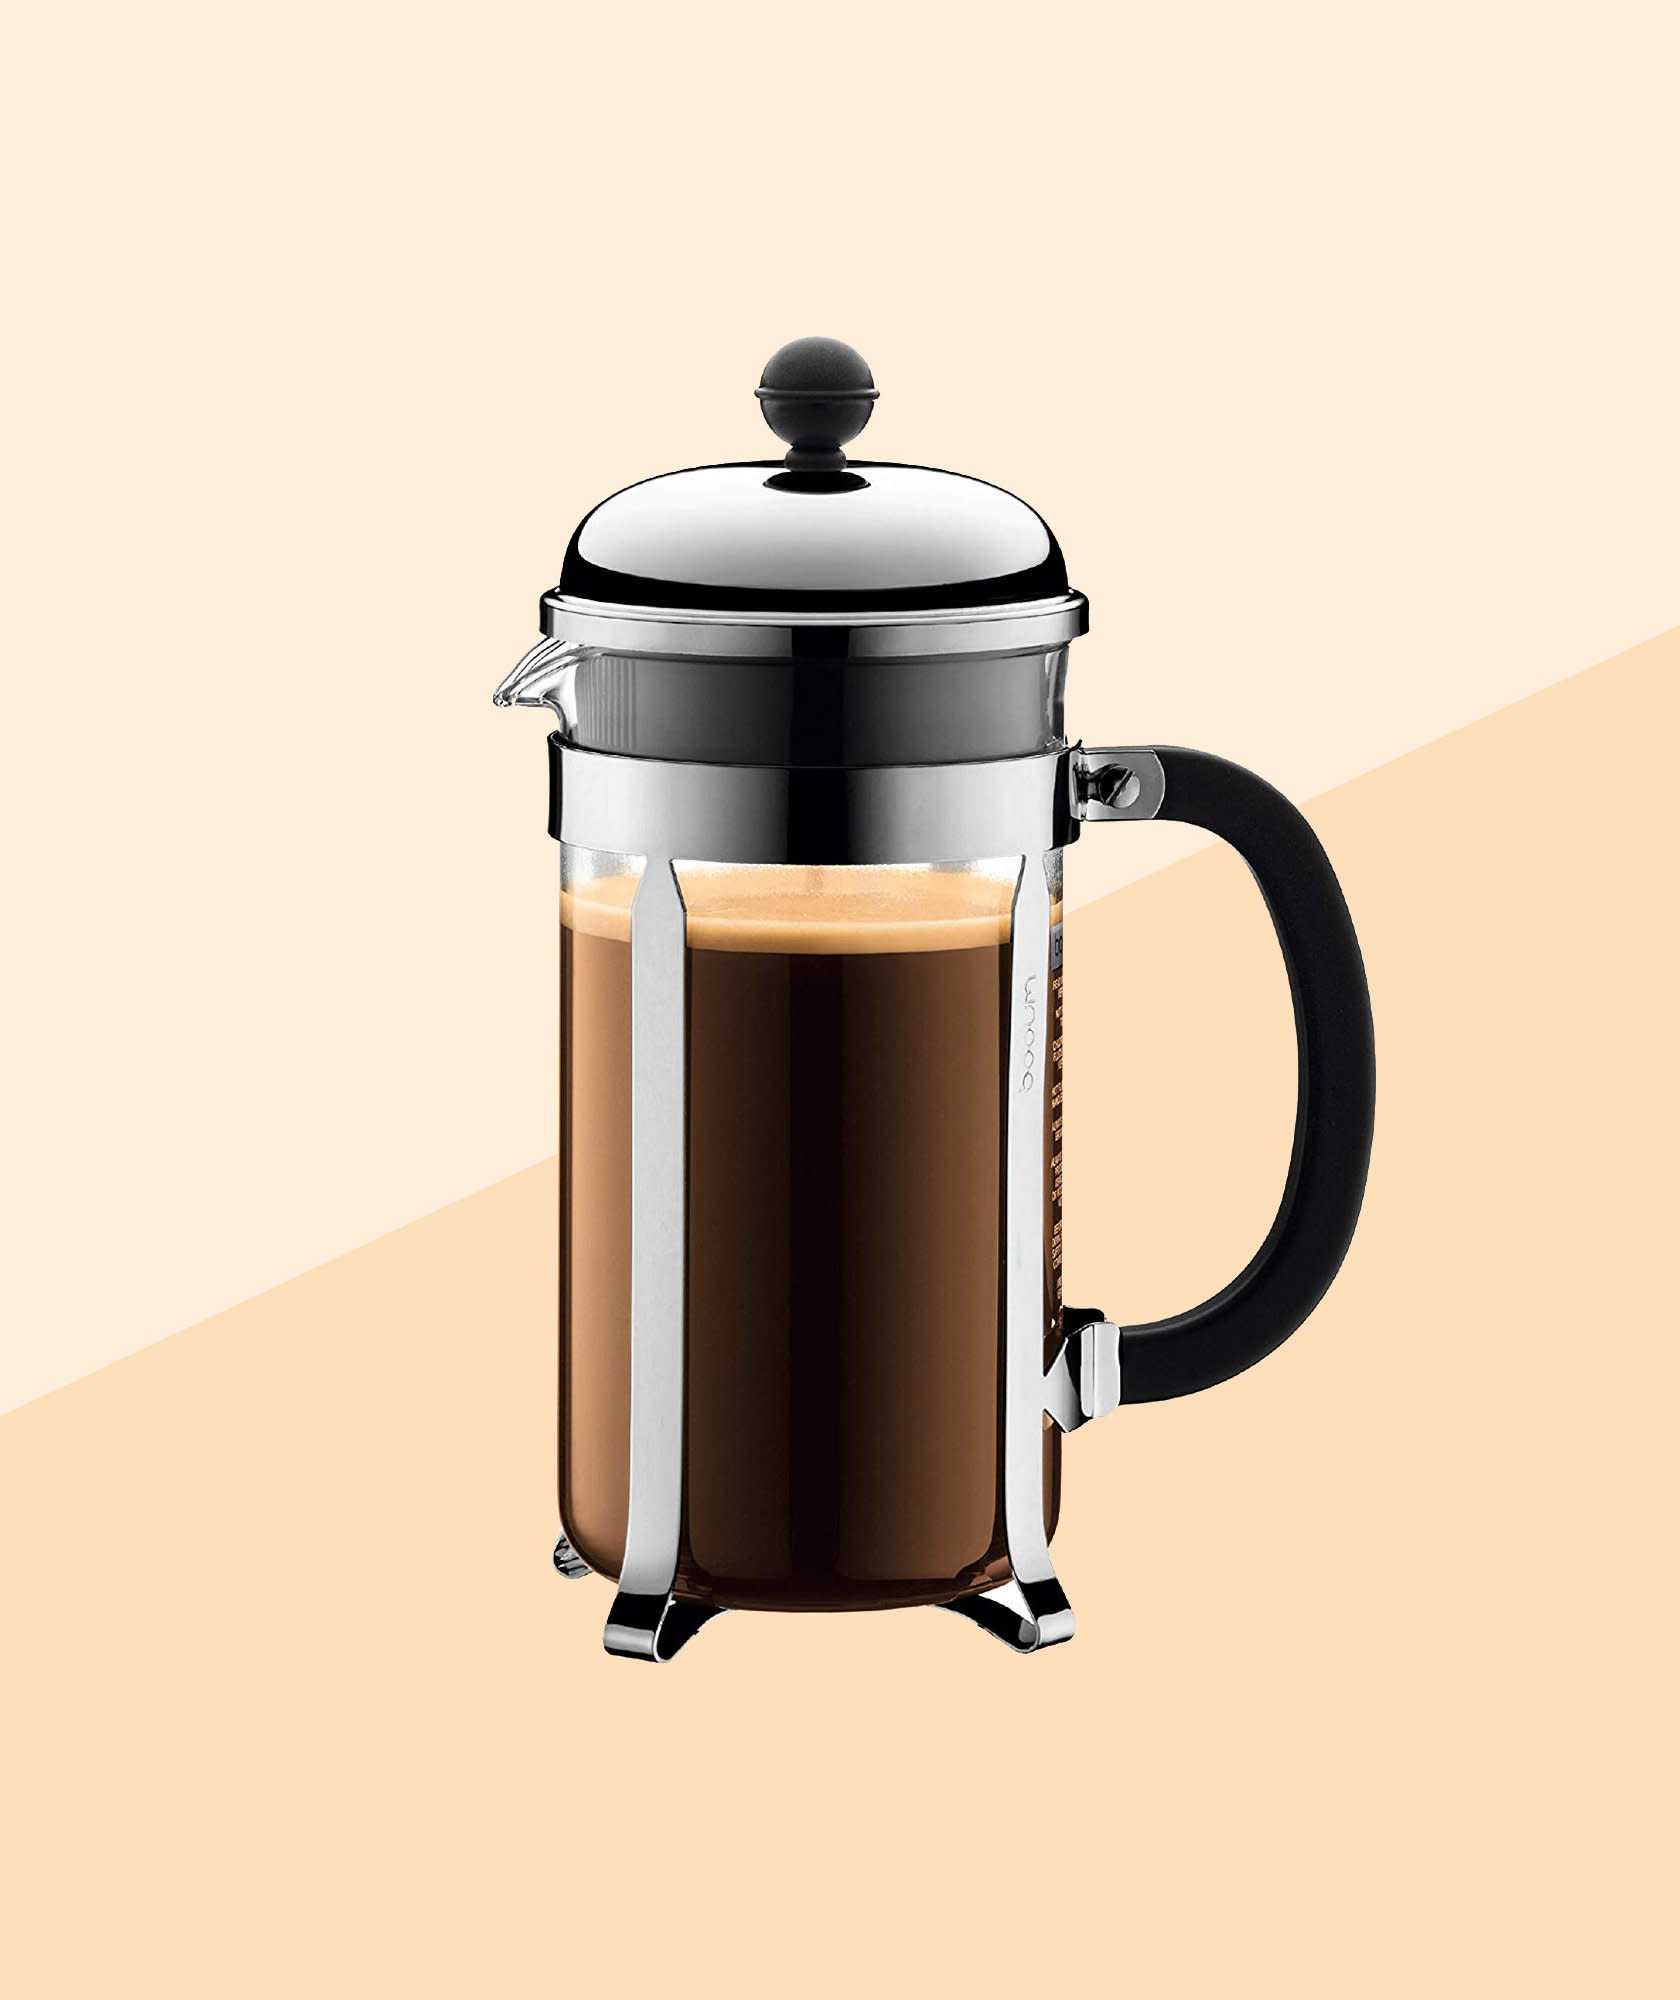 Amazon’s Best-Selling French Press Saved My Small Kitchen